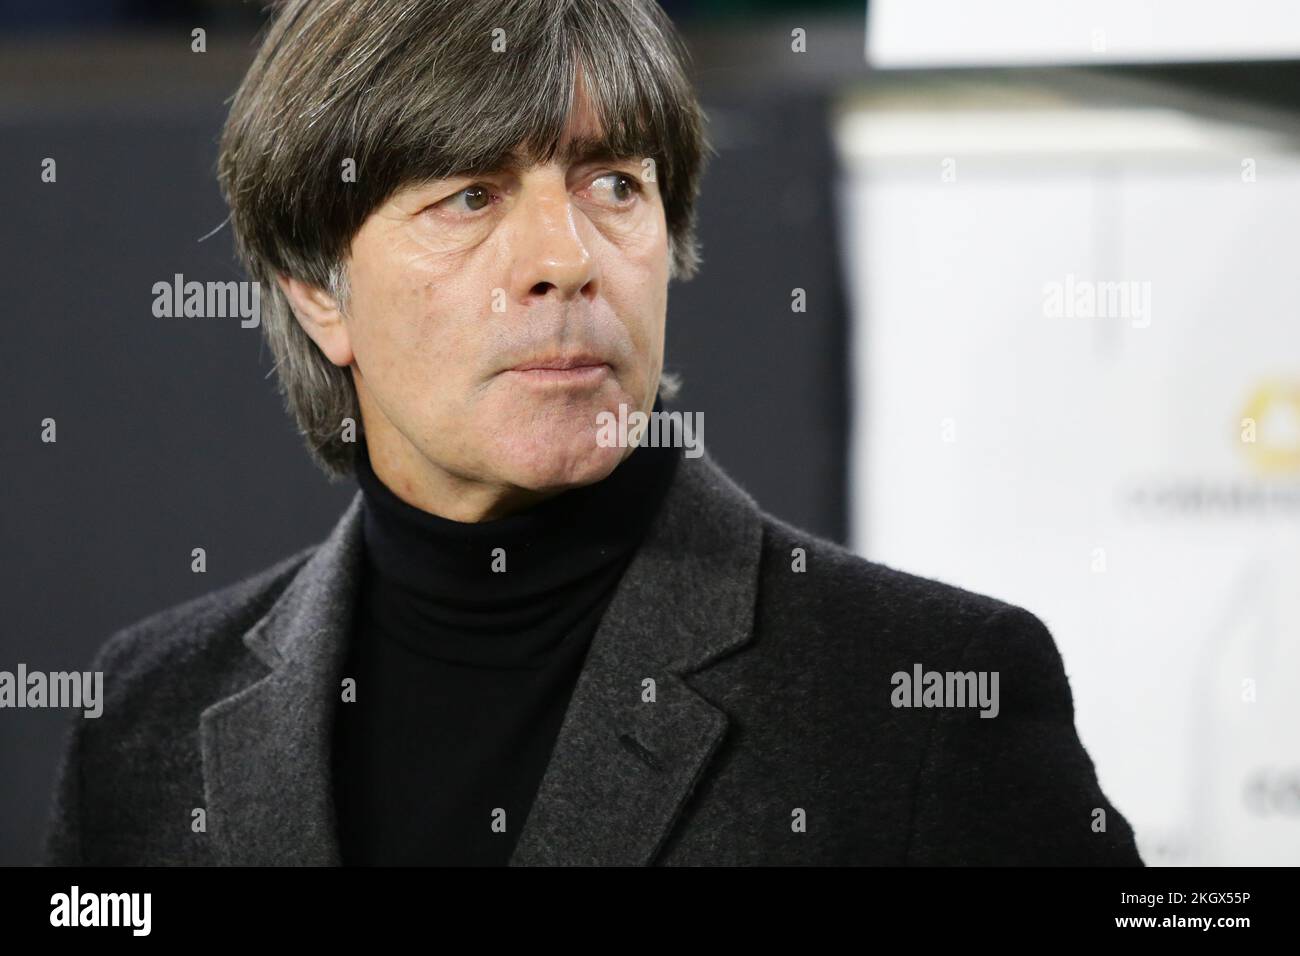 Wolfsburg, Germany, March 20, 2019: Germany national team head coach Joachim Low during the international friendly soccer game Germany vs Serbia. Stock Photo